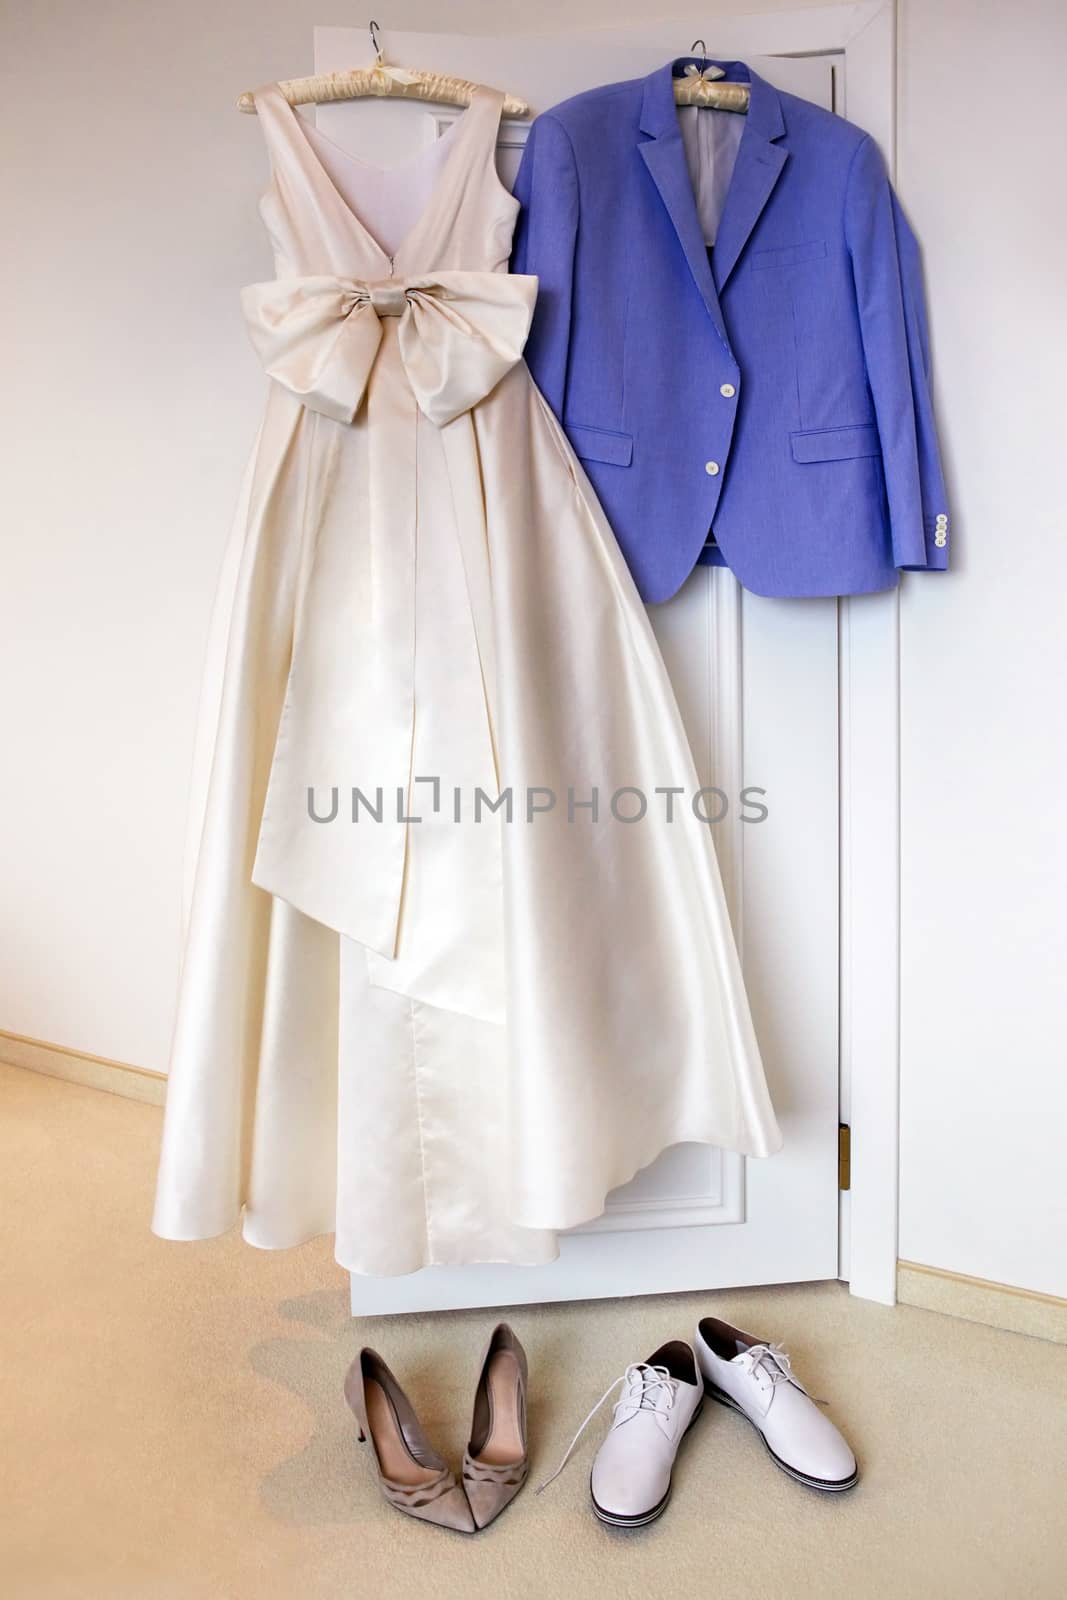 Wedding accessories - dress for the bride, for the groom jacket and beautiful shoes